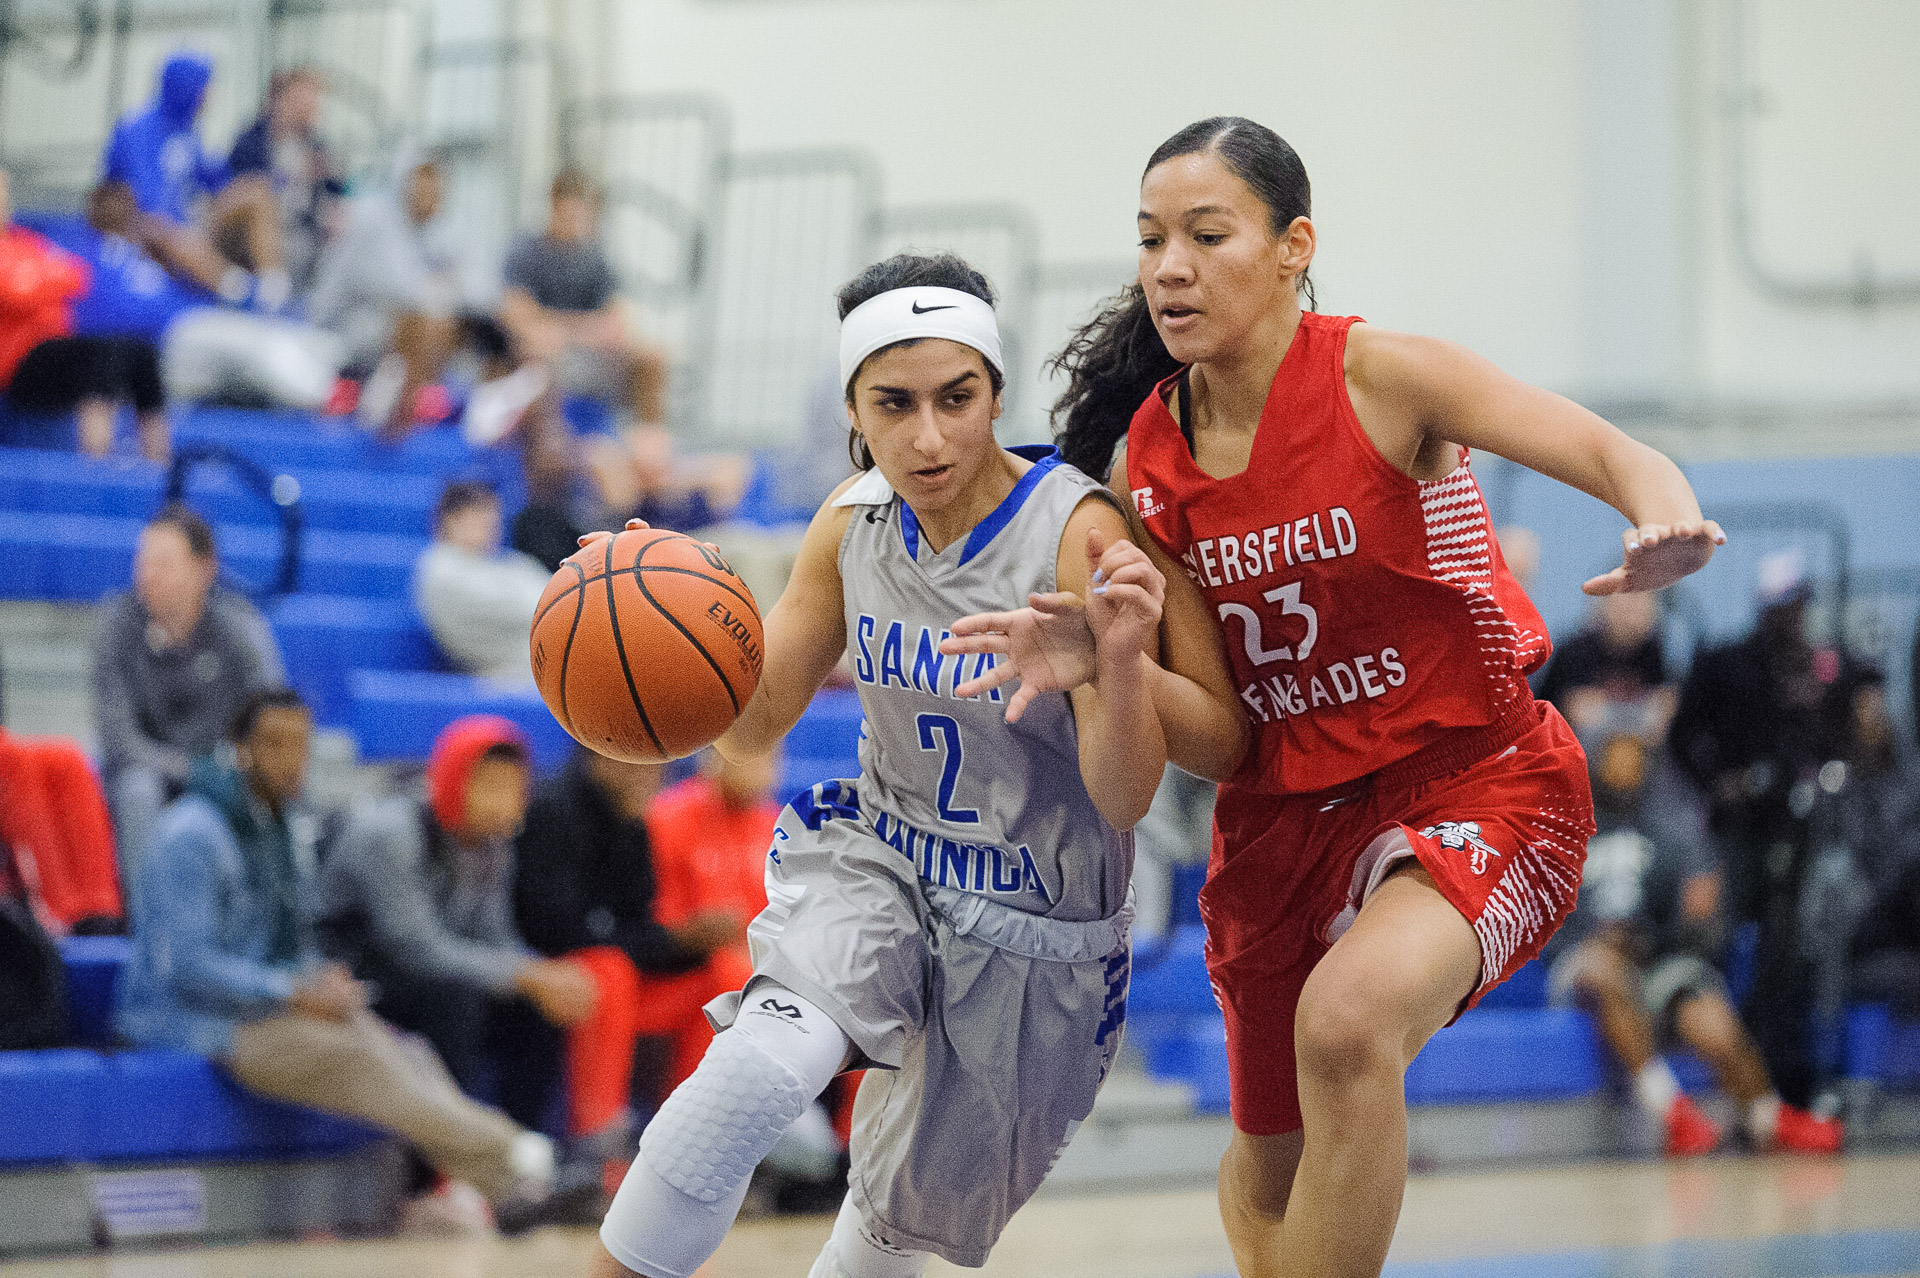  Guard Jessica Melamed (2,Left) of Santa Monica College dribbles past Octavia Croney (23,Right) of Bakersfield College. The Santa Monica College Corsairs lose the game 62-72 to the Bakersfield College Renegades. The game was held at the SMC Pavilion 